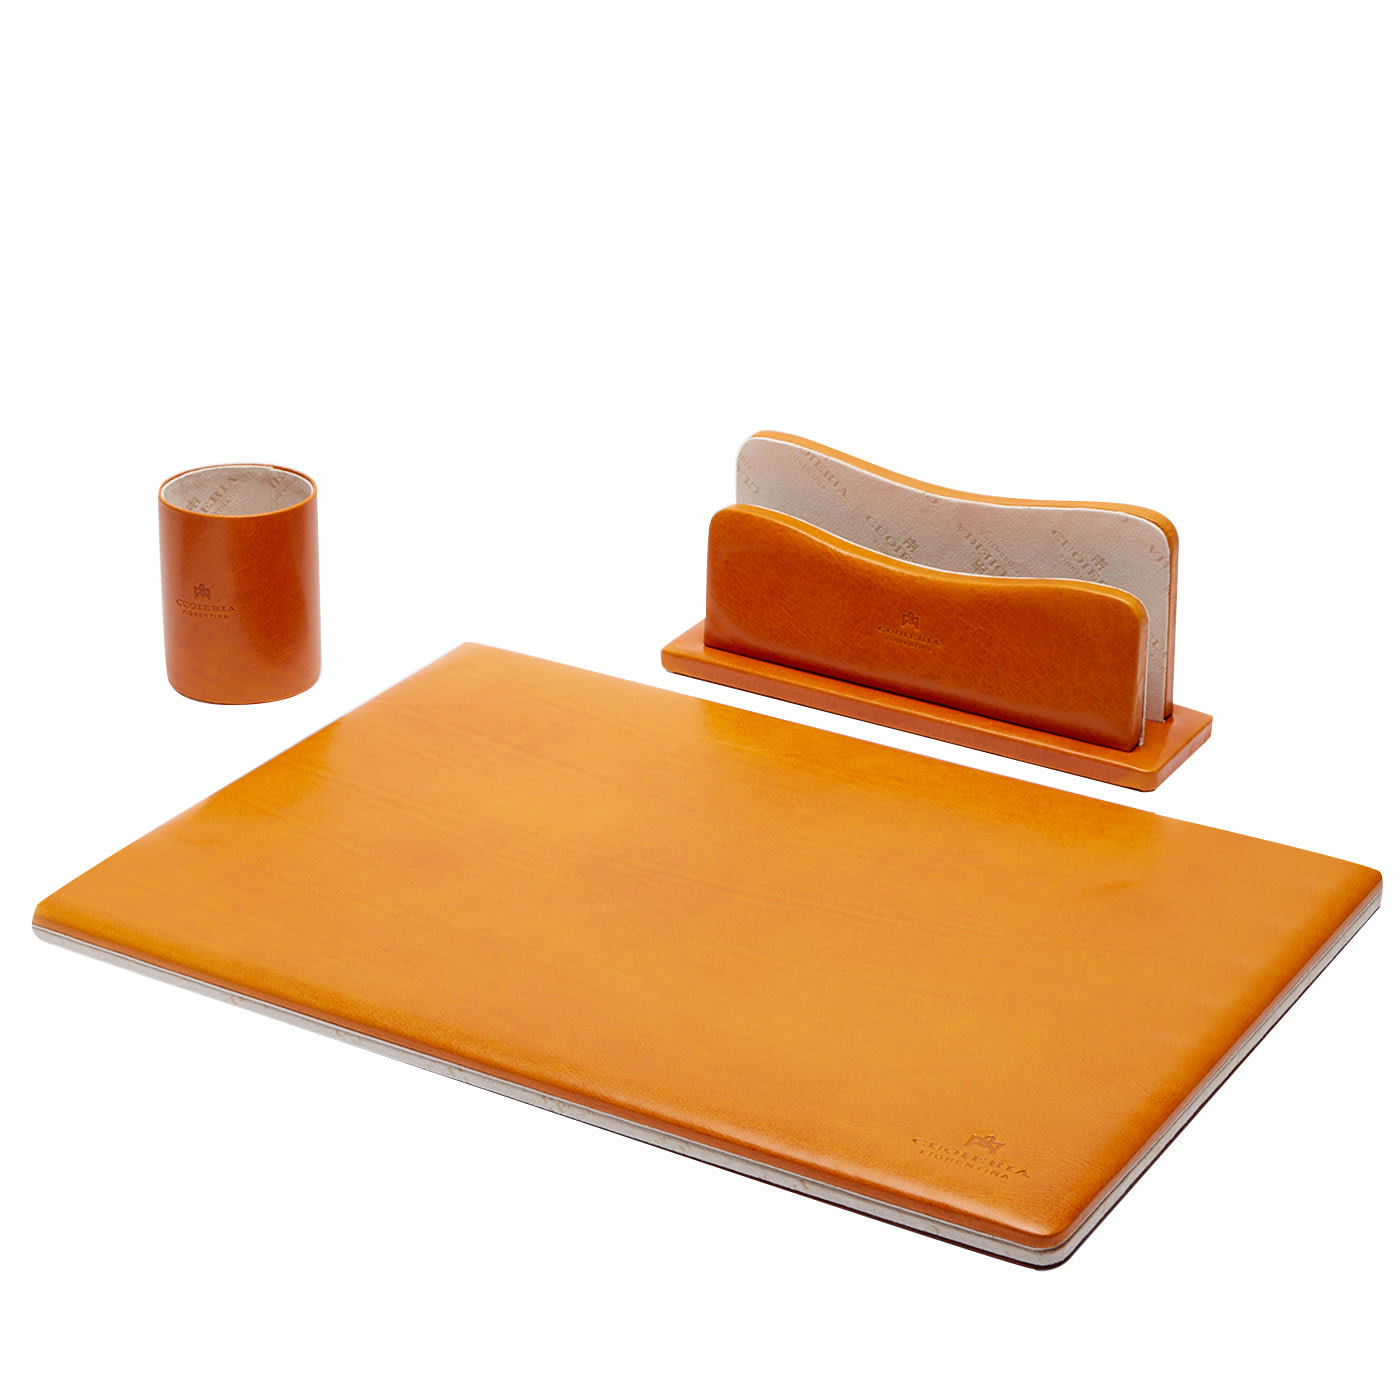 Warm & Color Yellow Set of Desk Pad, Pen and Letter Holder - Cuoieria Fiorentina